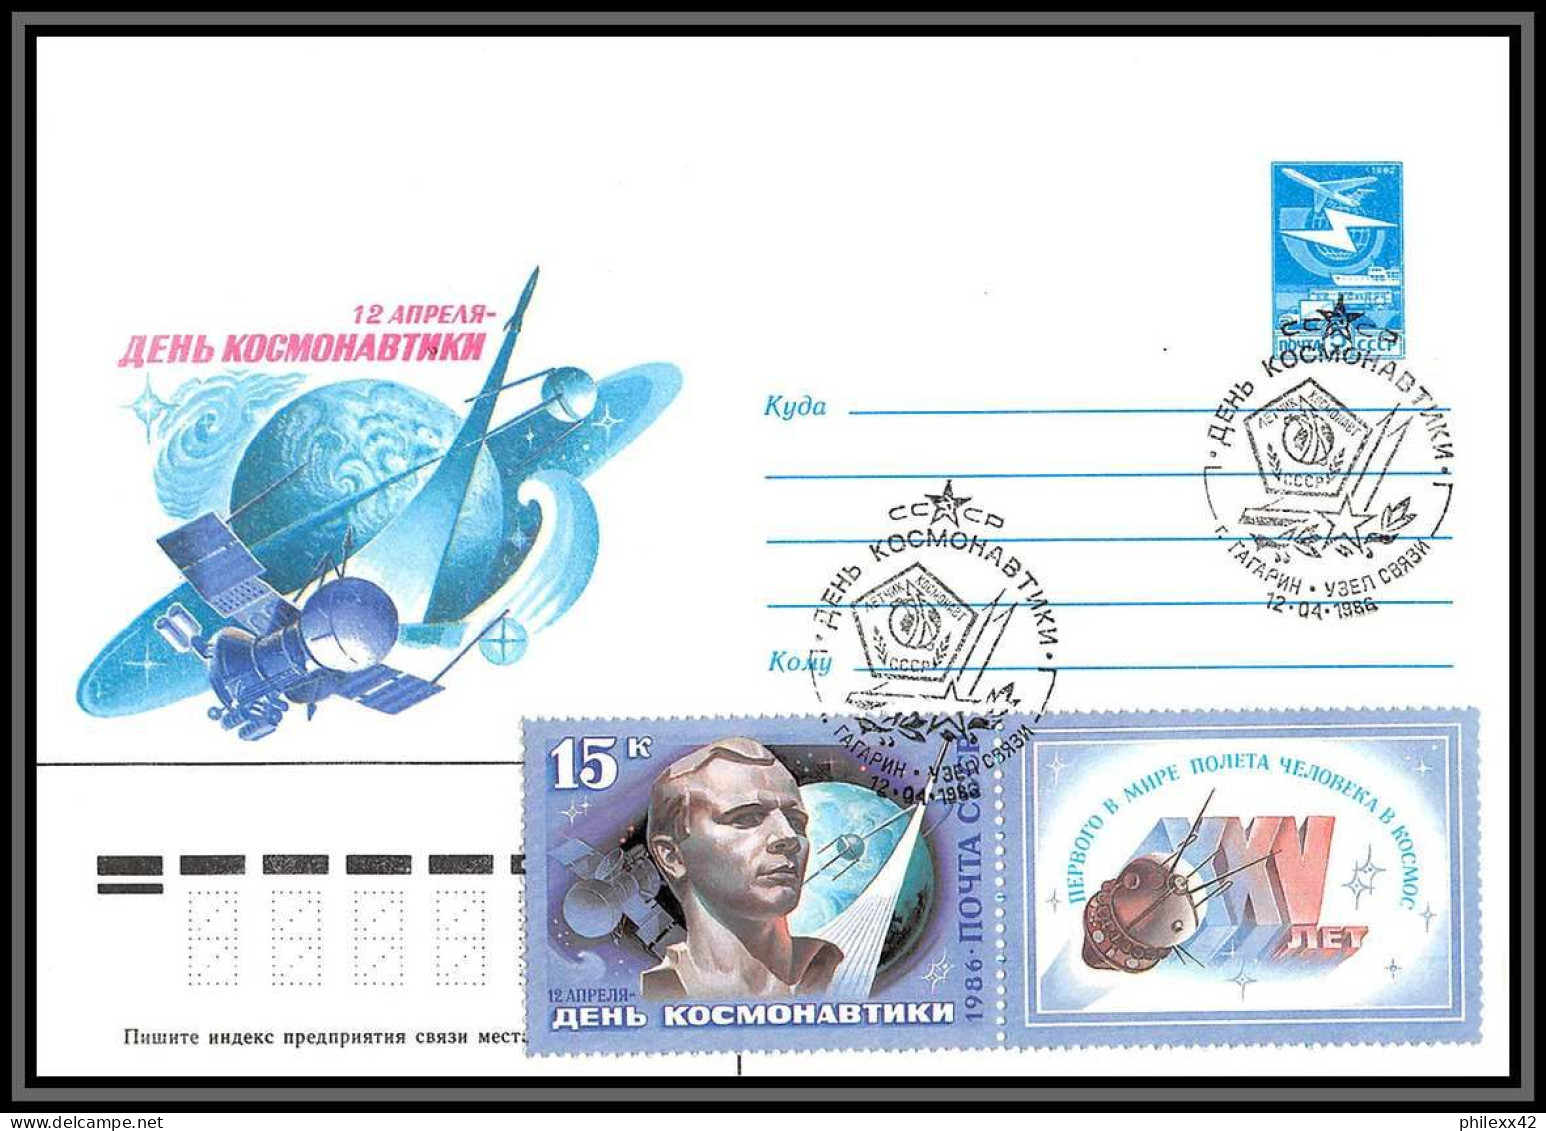 3426 Espace (space) lot 4 Entier postal Stationery Russie (Russia urss USSR) cosmonauts day gagarine 12/4/1986